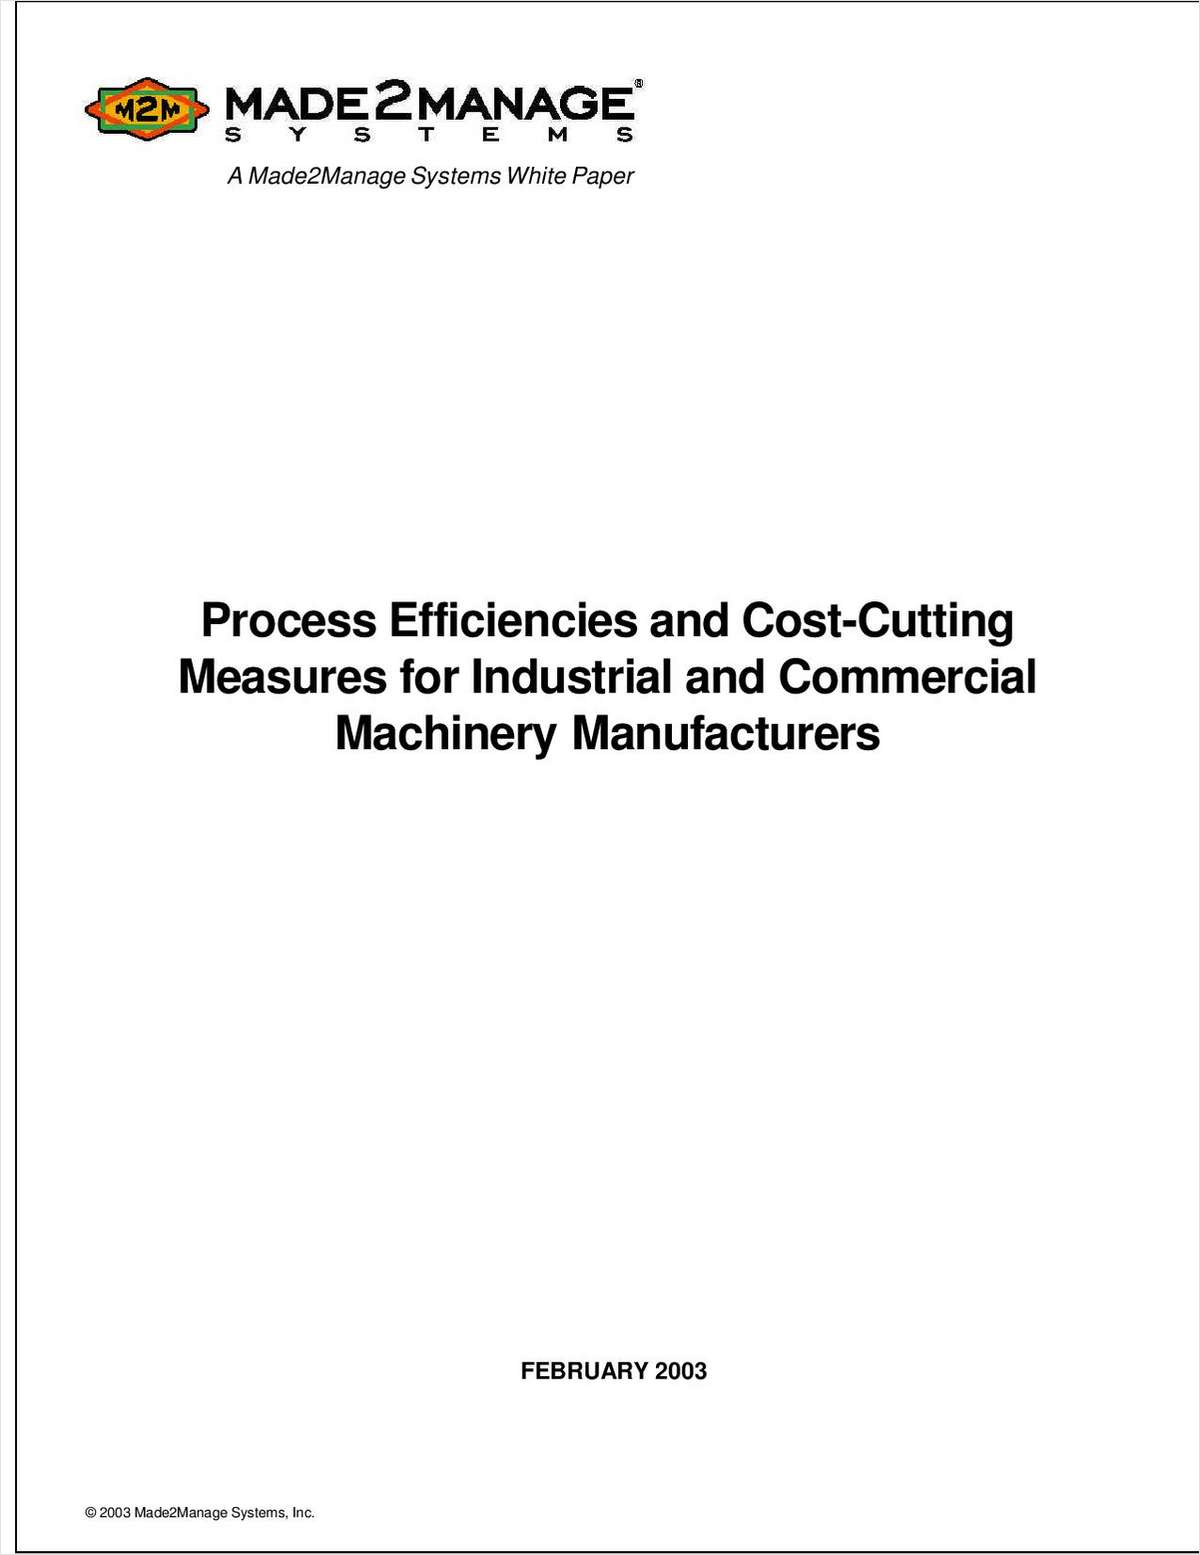 Process Efficiencies and Cost-Cutting Measures for Industrial and Commercial Machinery Manufacturers